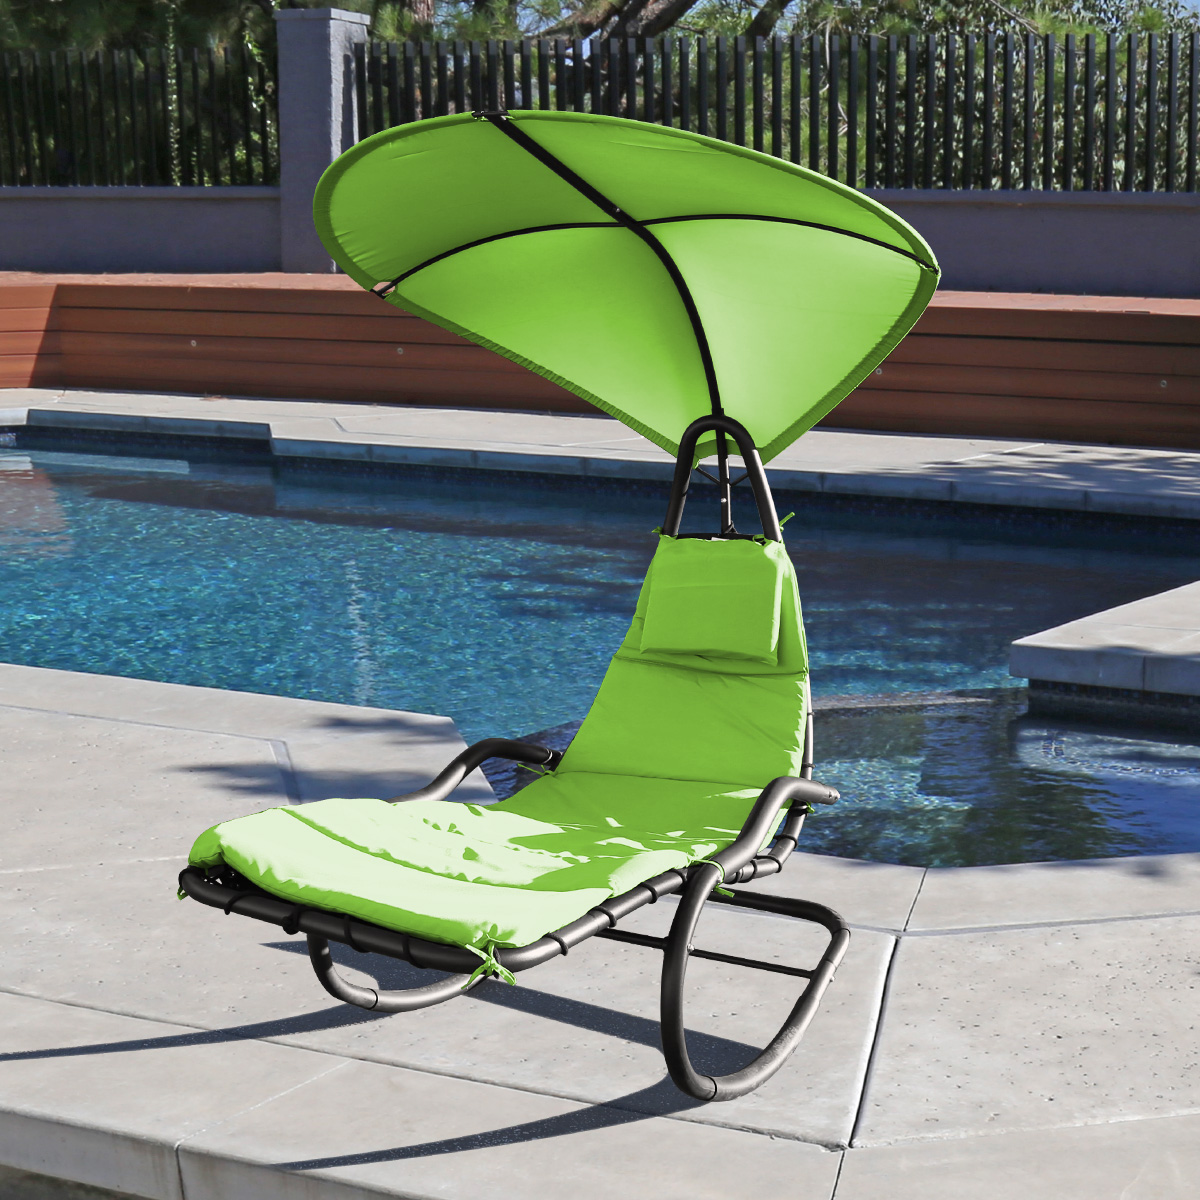 Rocking Hanging Lounge Chair - Curved Chaise Rocking Lounge Chair Swing For Backyard Patio w/ Built-in Pillow Removable Canopy with stand {Green} - image 2 of 8